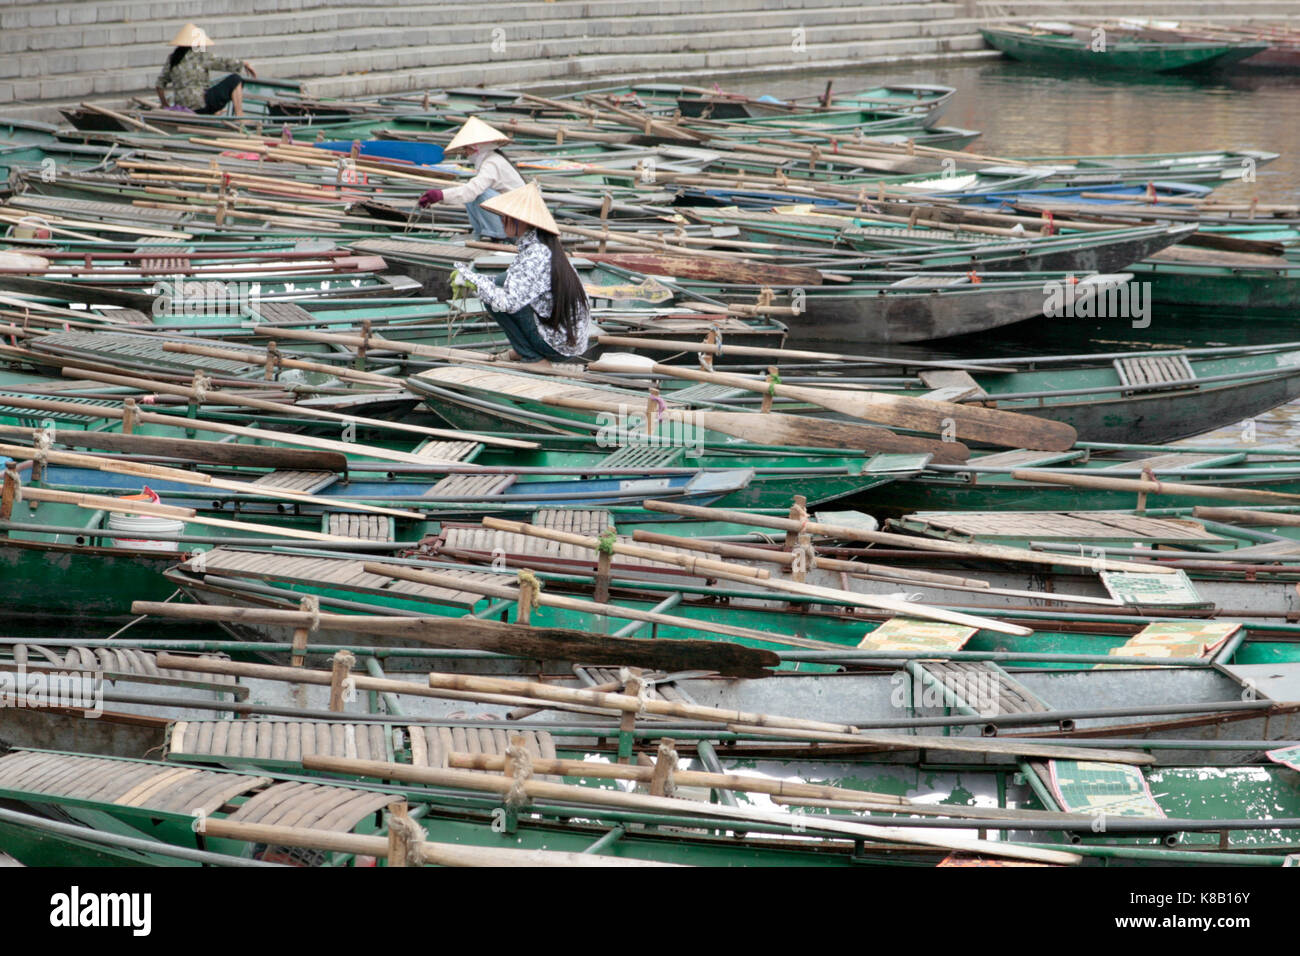 The jumble of boats waiting for visitors at the dock at Trang An for a trip through the caves. Stock Photo